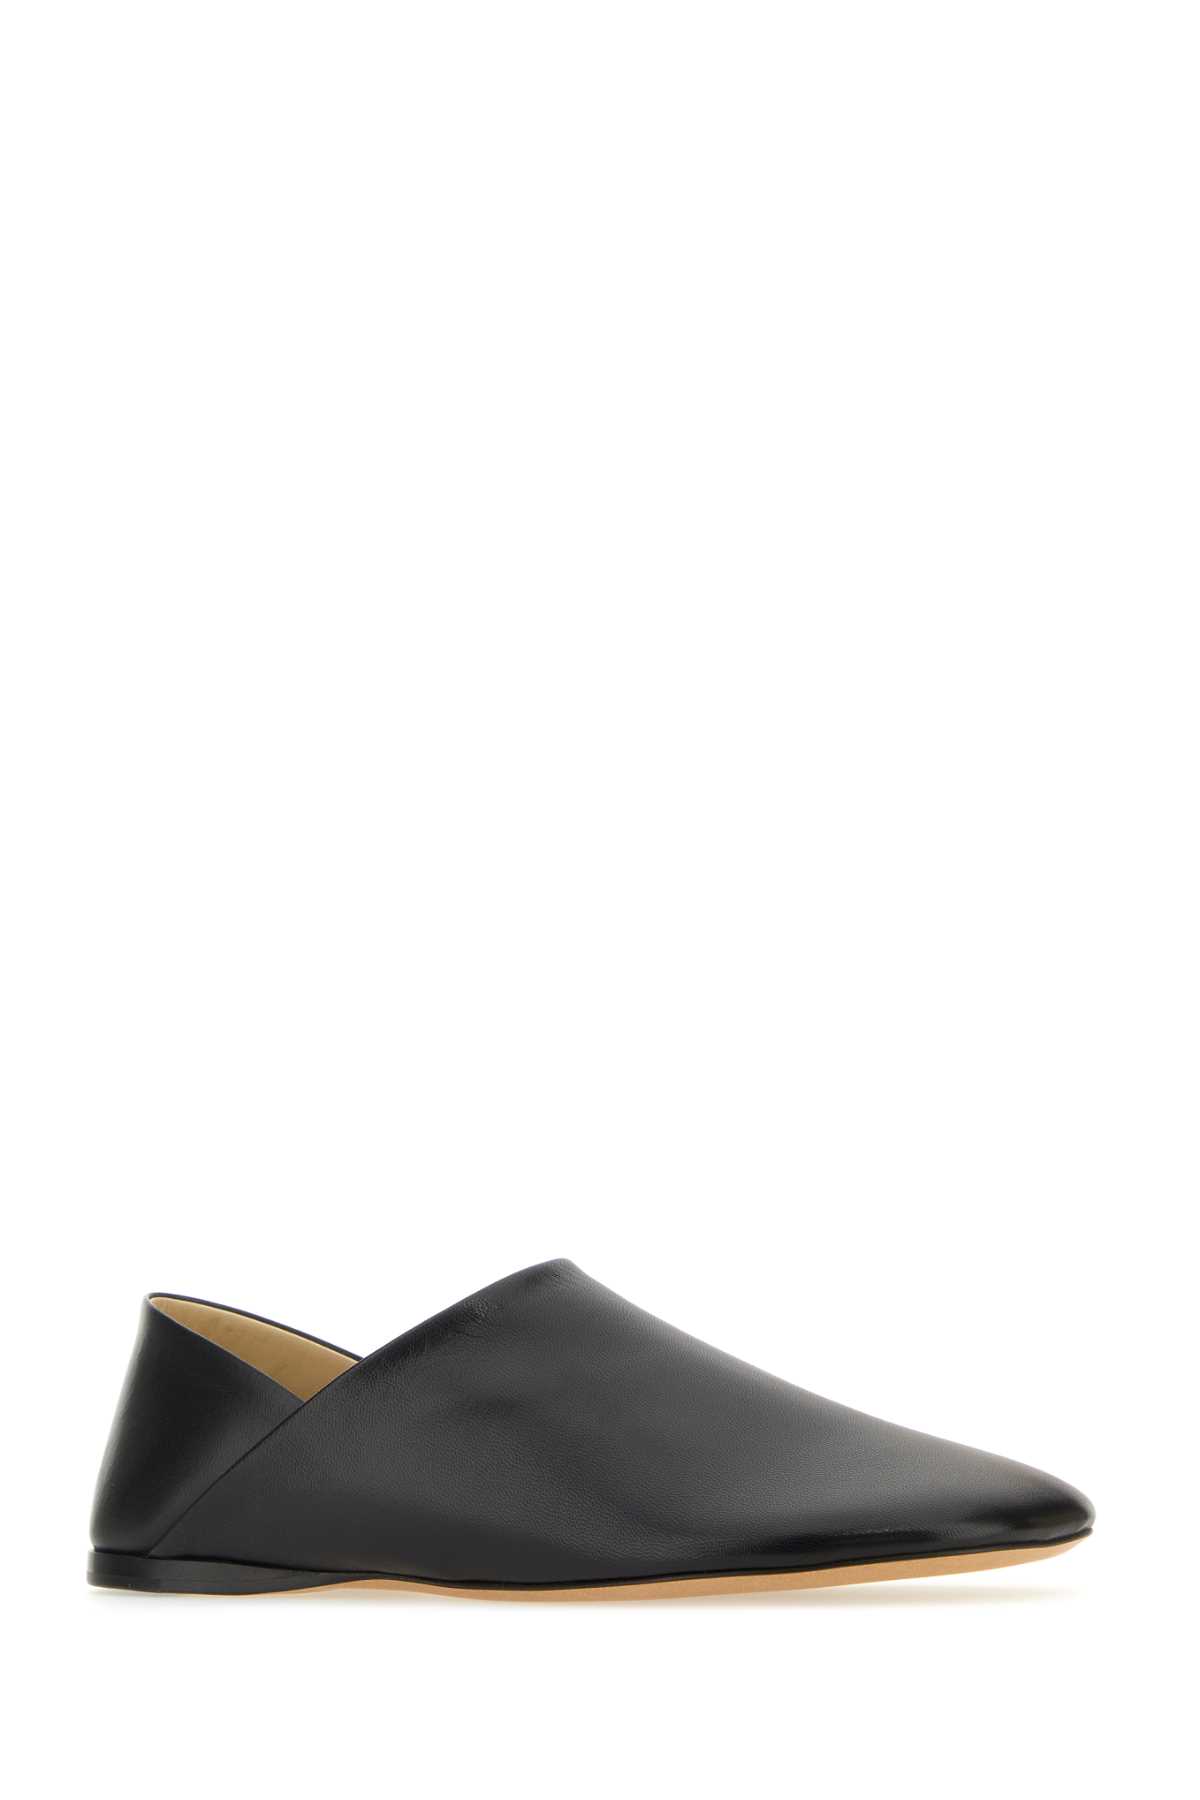 Loewe Black Leather Toy Loafers